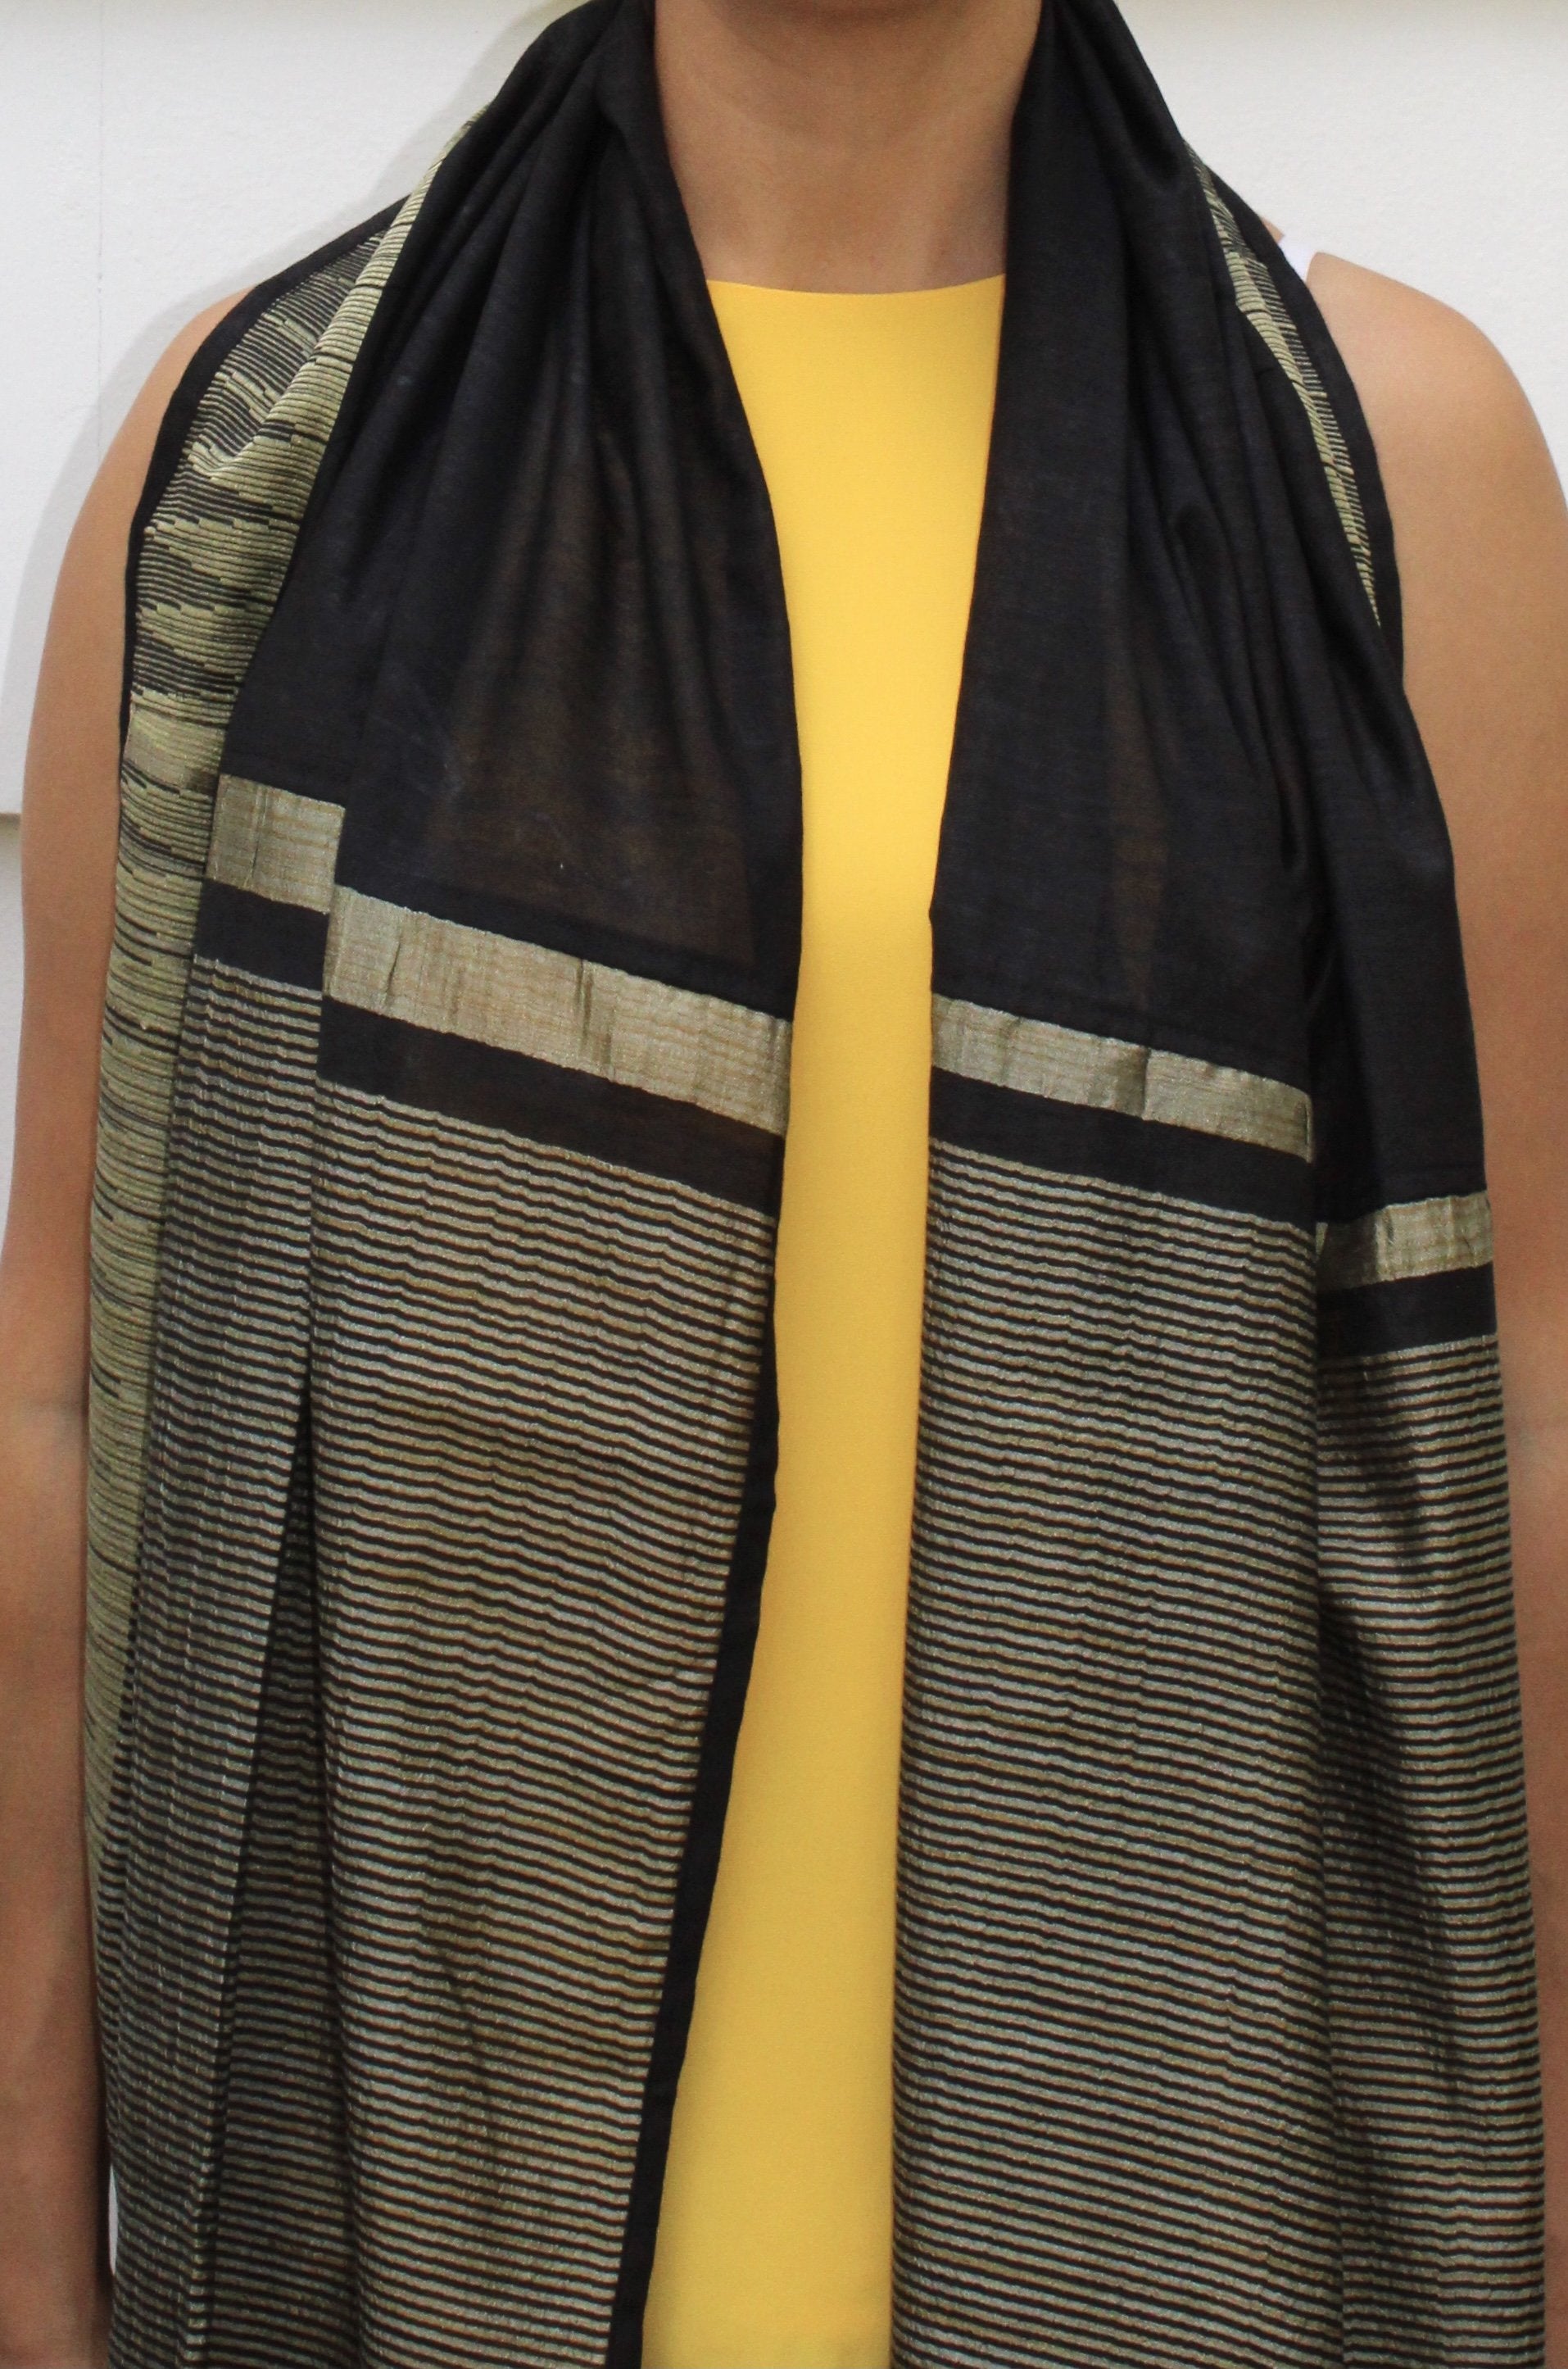 The Upcycled Silk Scarf Patterned - Black and Gold stripes